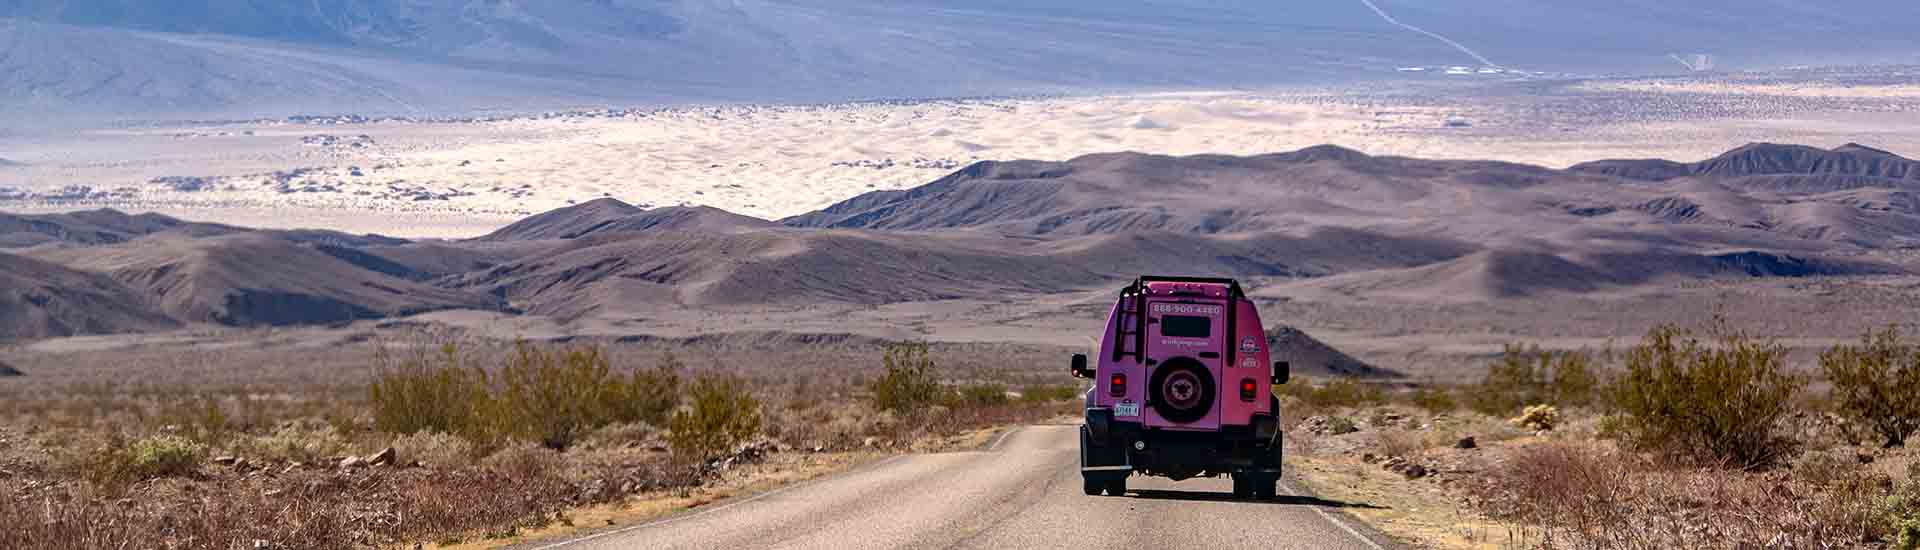 Rear end of Pink Adventure Tour Trekker driving towards the hills and slat flats of Death Valley National Park